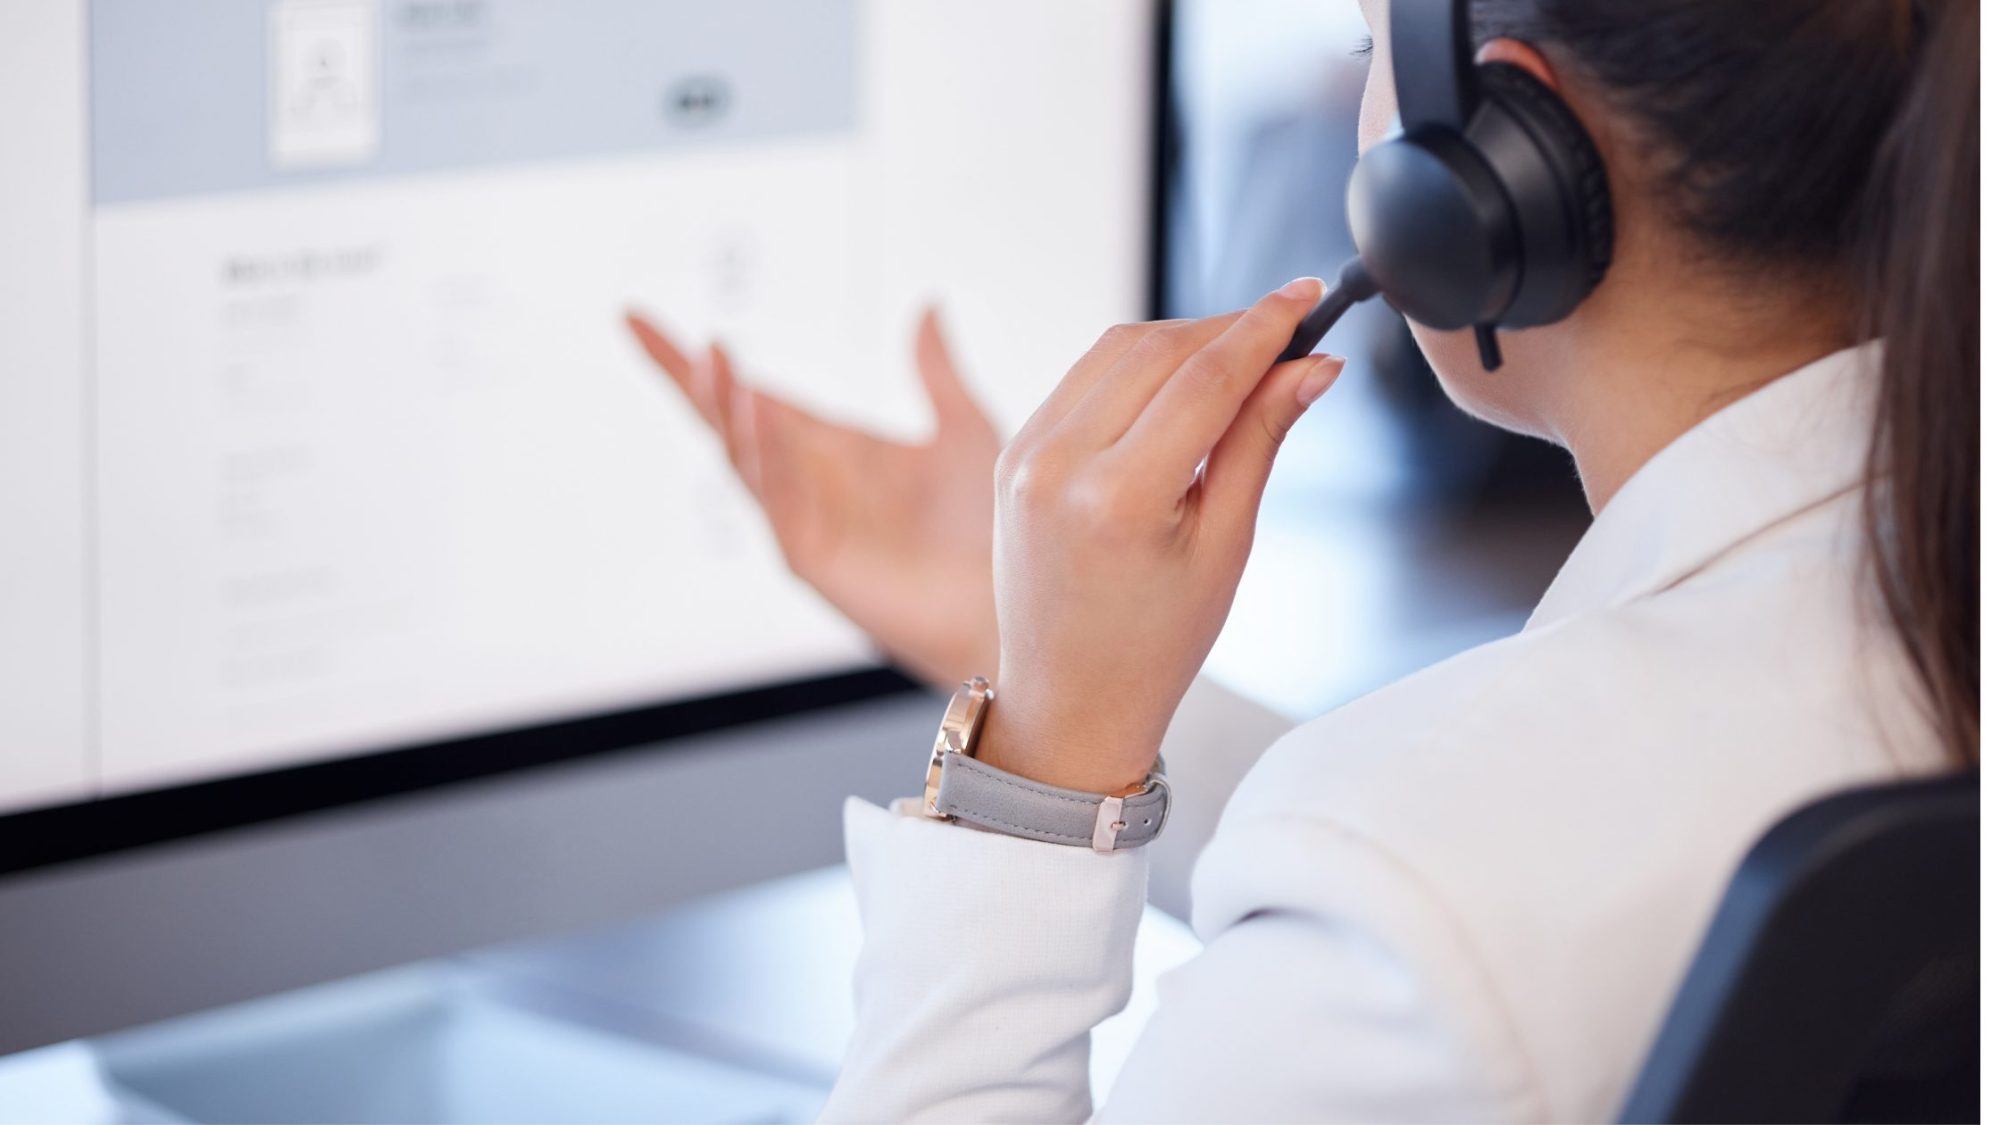 Close-up of a person wearing a headset, gesturing with one hand while looking at a computer screen.